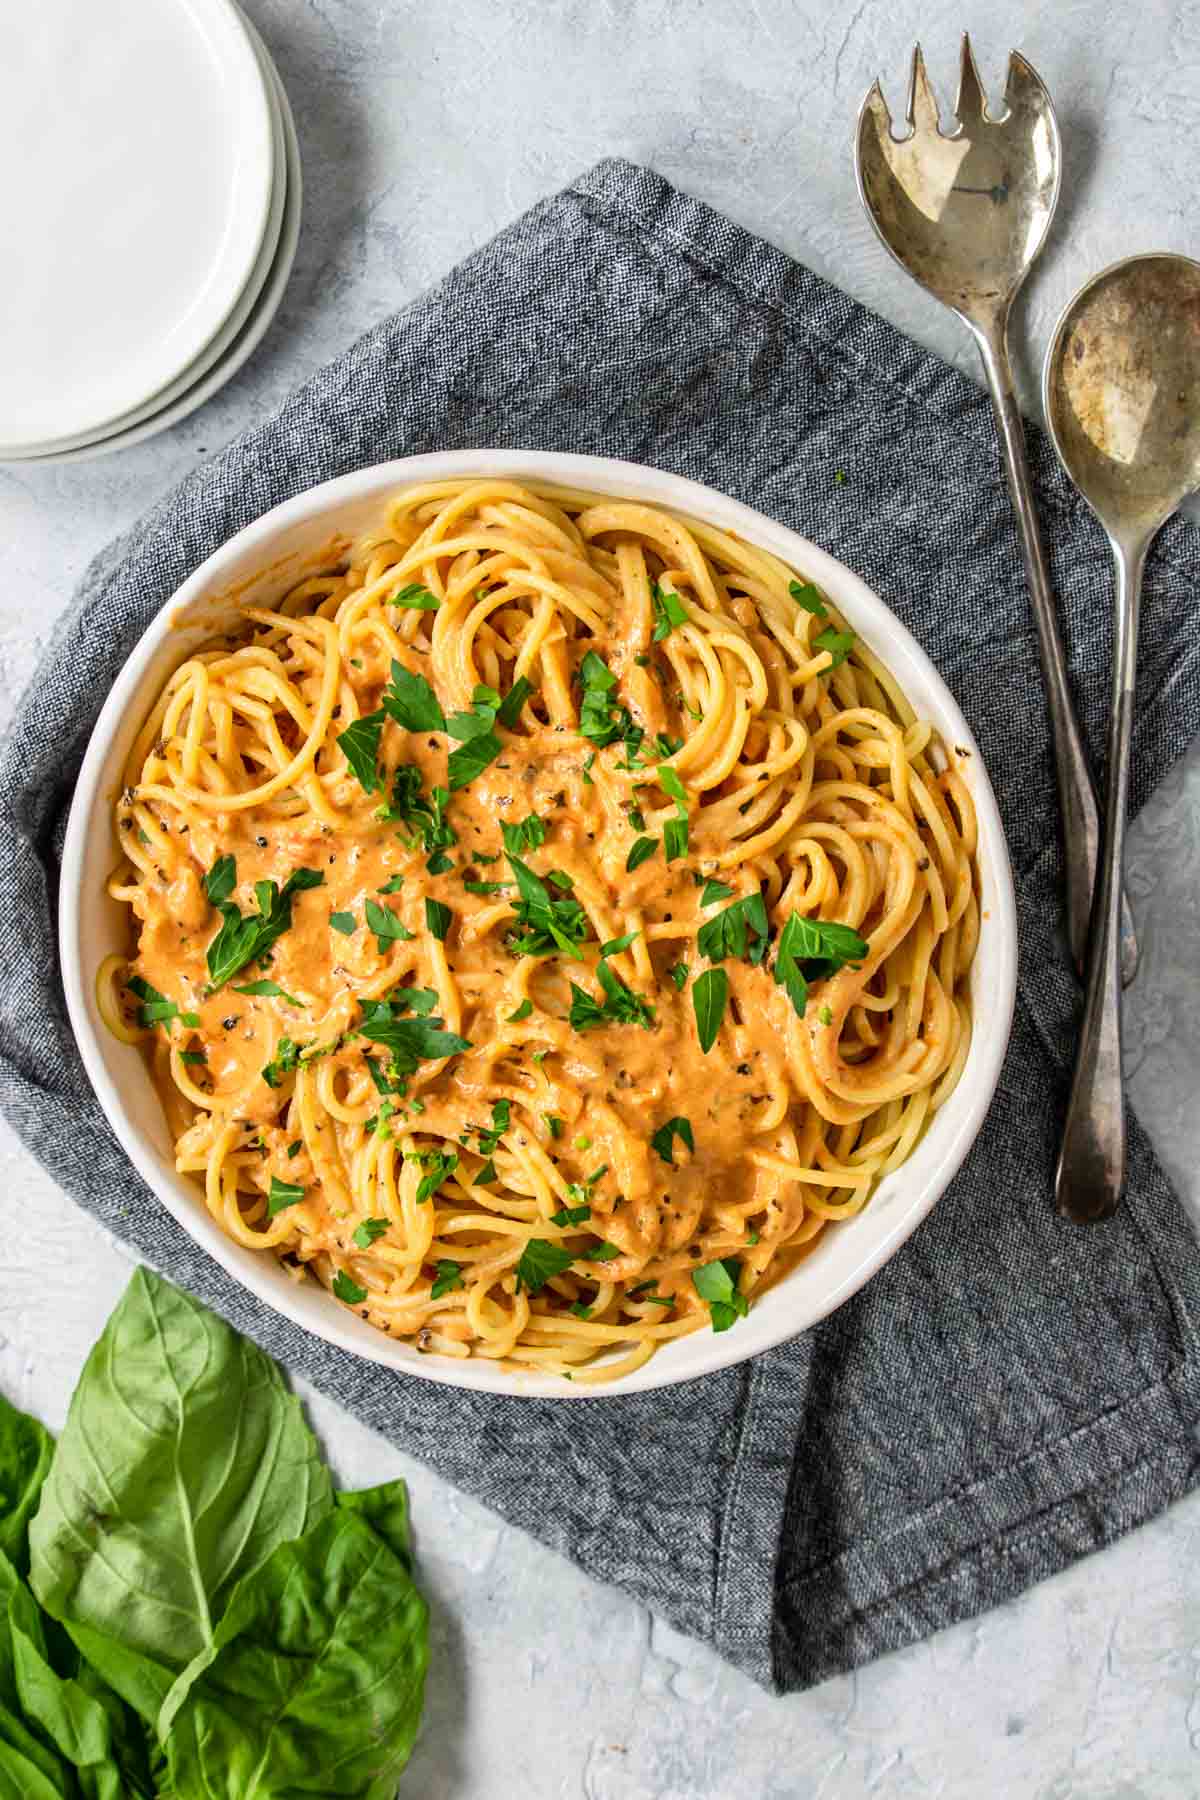 A bowl of pasta with tomato cream sauce